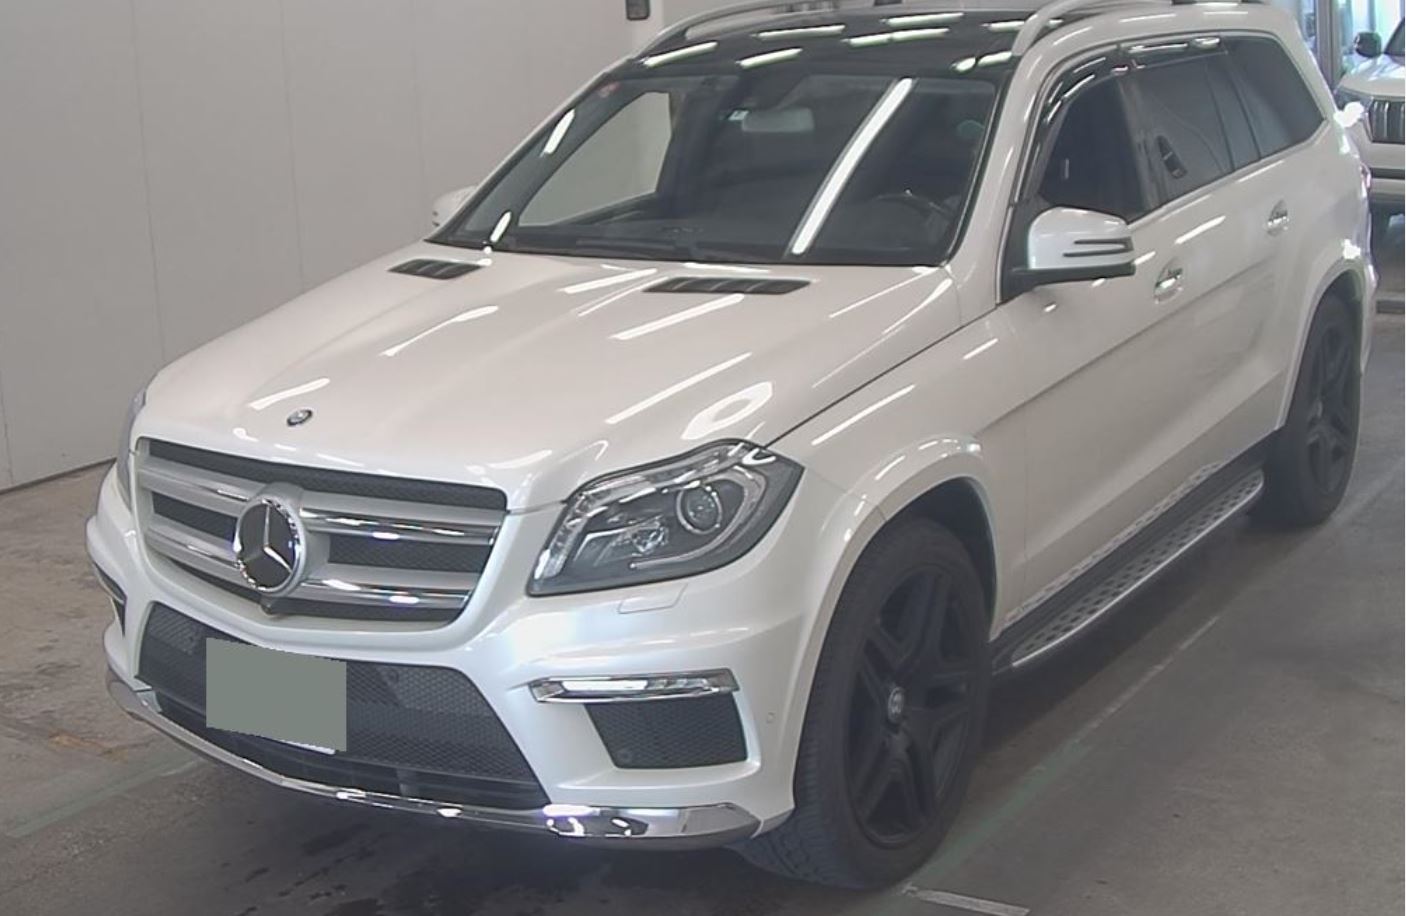 Mercedes Benz GL550 AMG Exclusive Package (photo: 1)